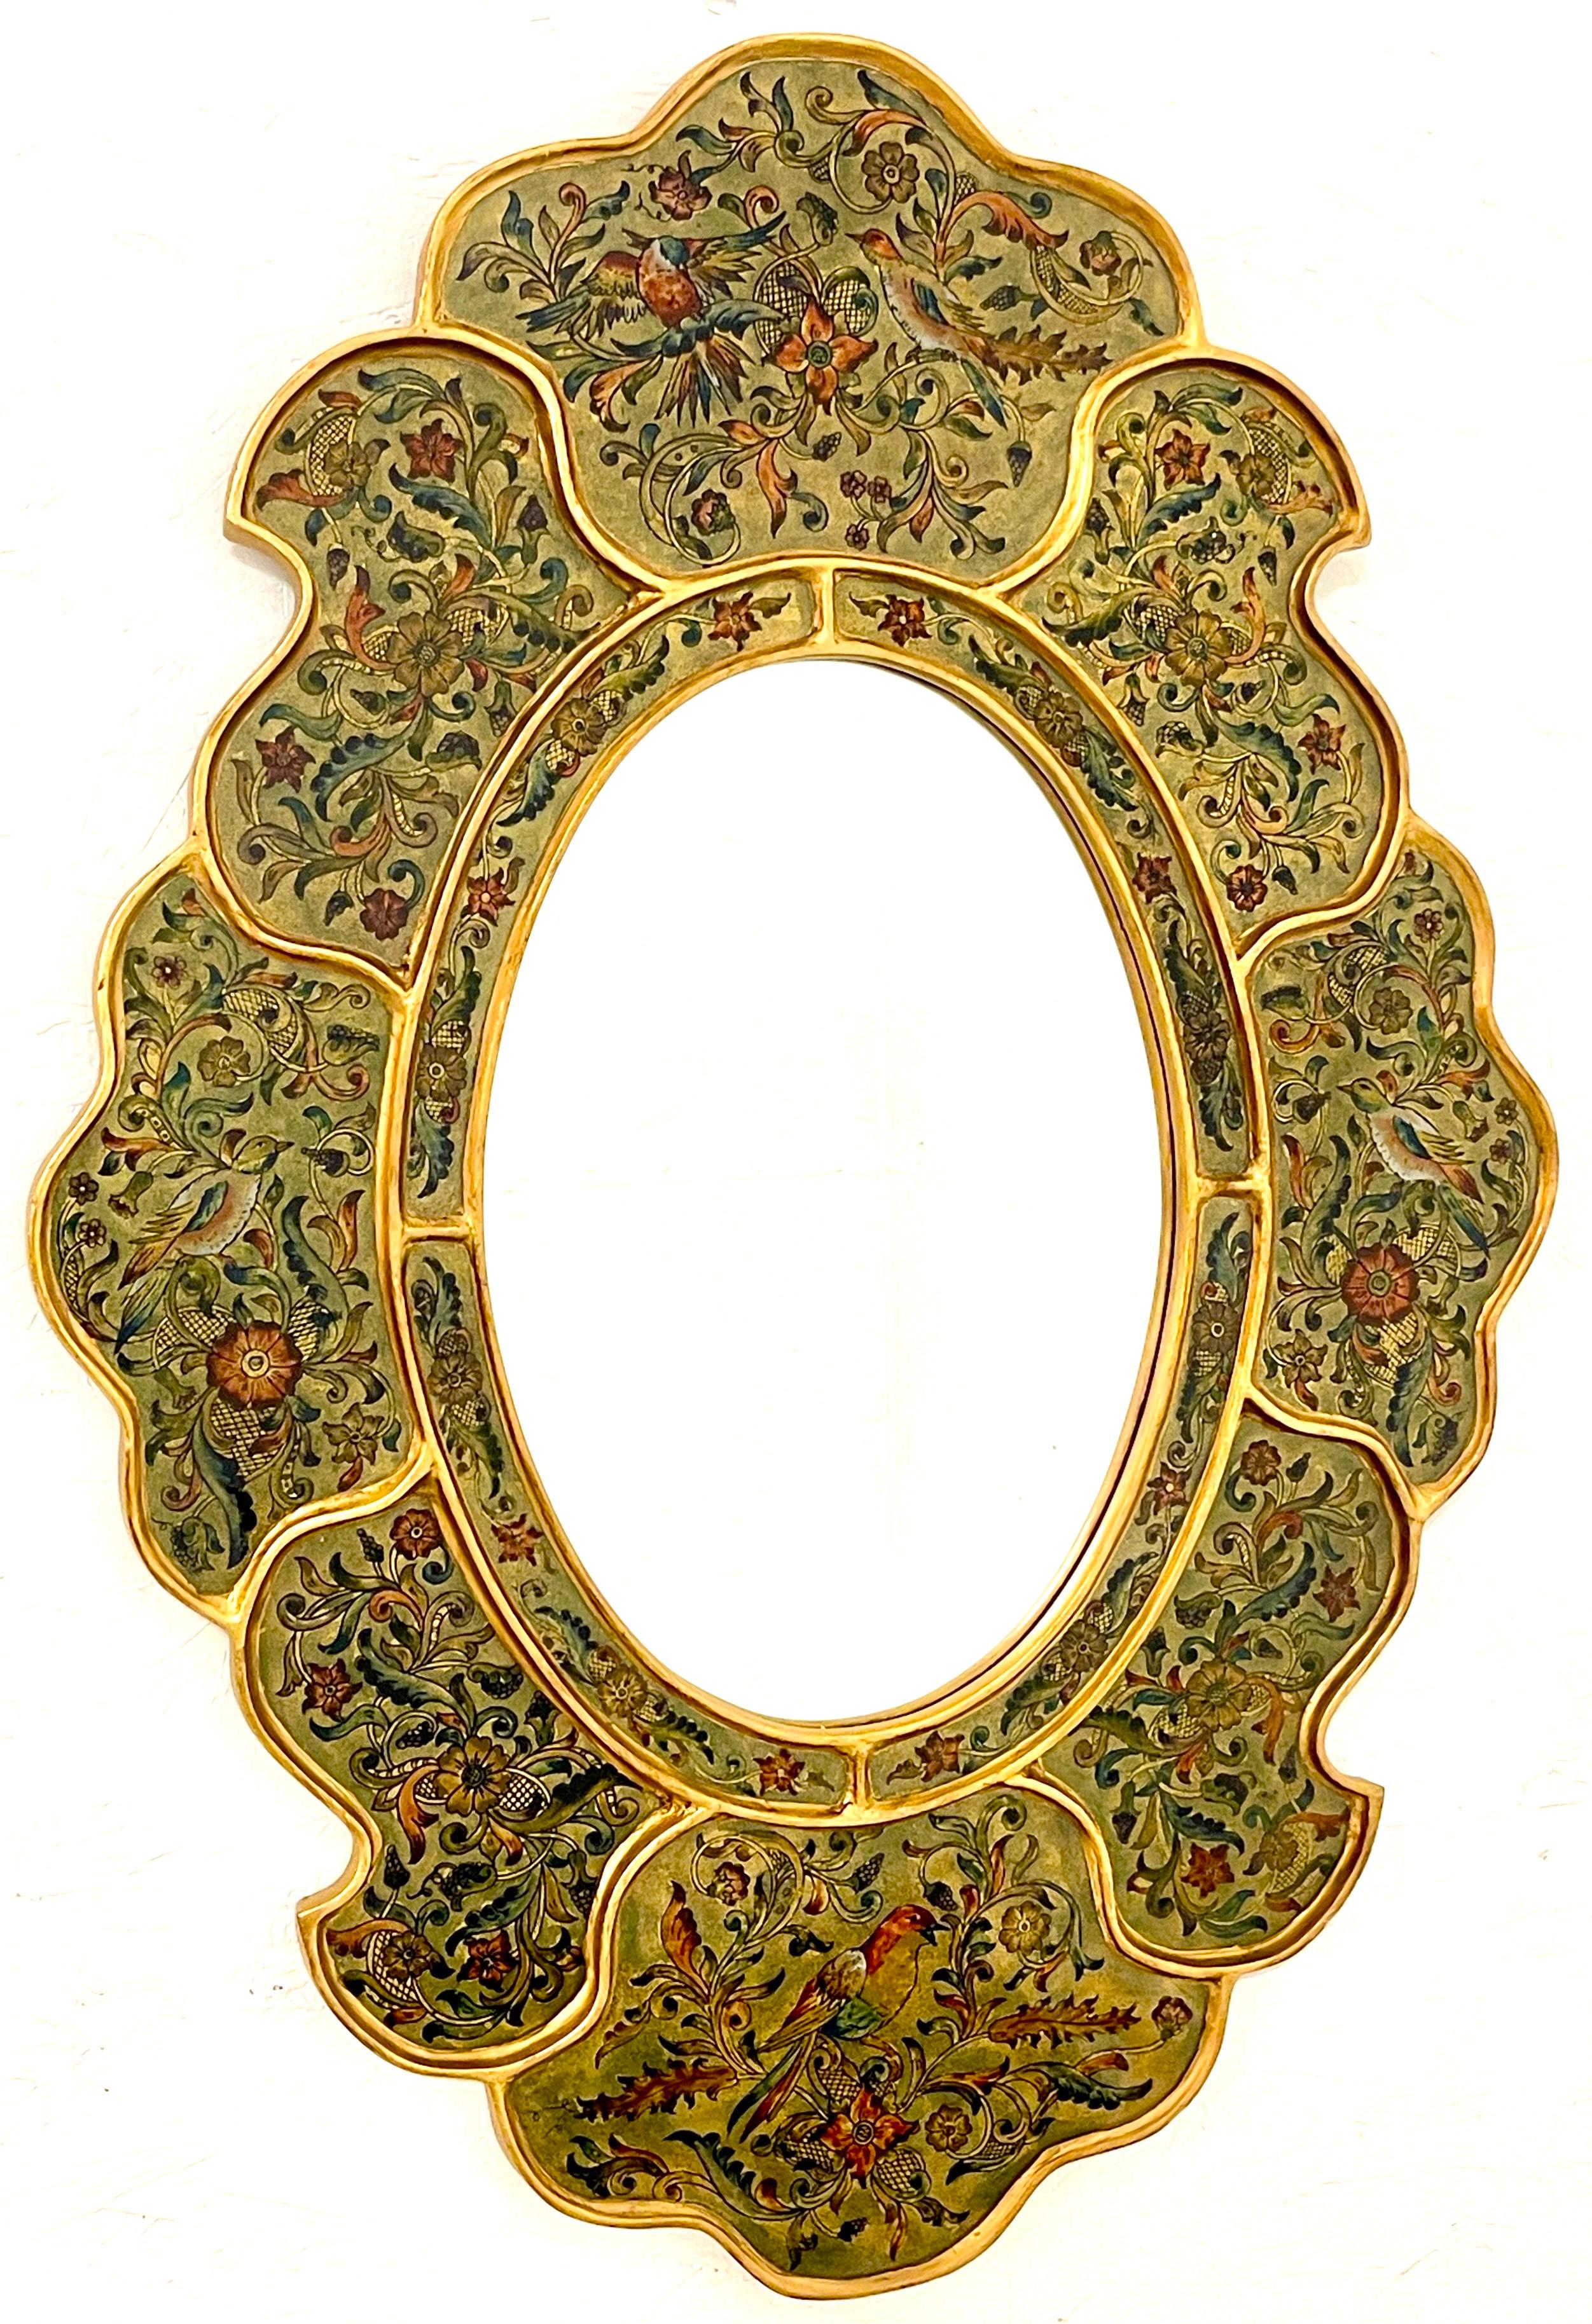 Spanish Colonial Bird & Floral Decorated Gilt Scalloped Verre Églomisé Mirror
Peru,  Circa 1980s
An exquisite Spanish Colonial Style Peruvian Bird & Floral Decorated Gilt Scalloped Verre Églomisé Mirror from the 1980s. This stunning piece stands